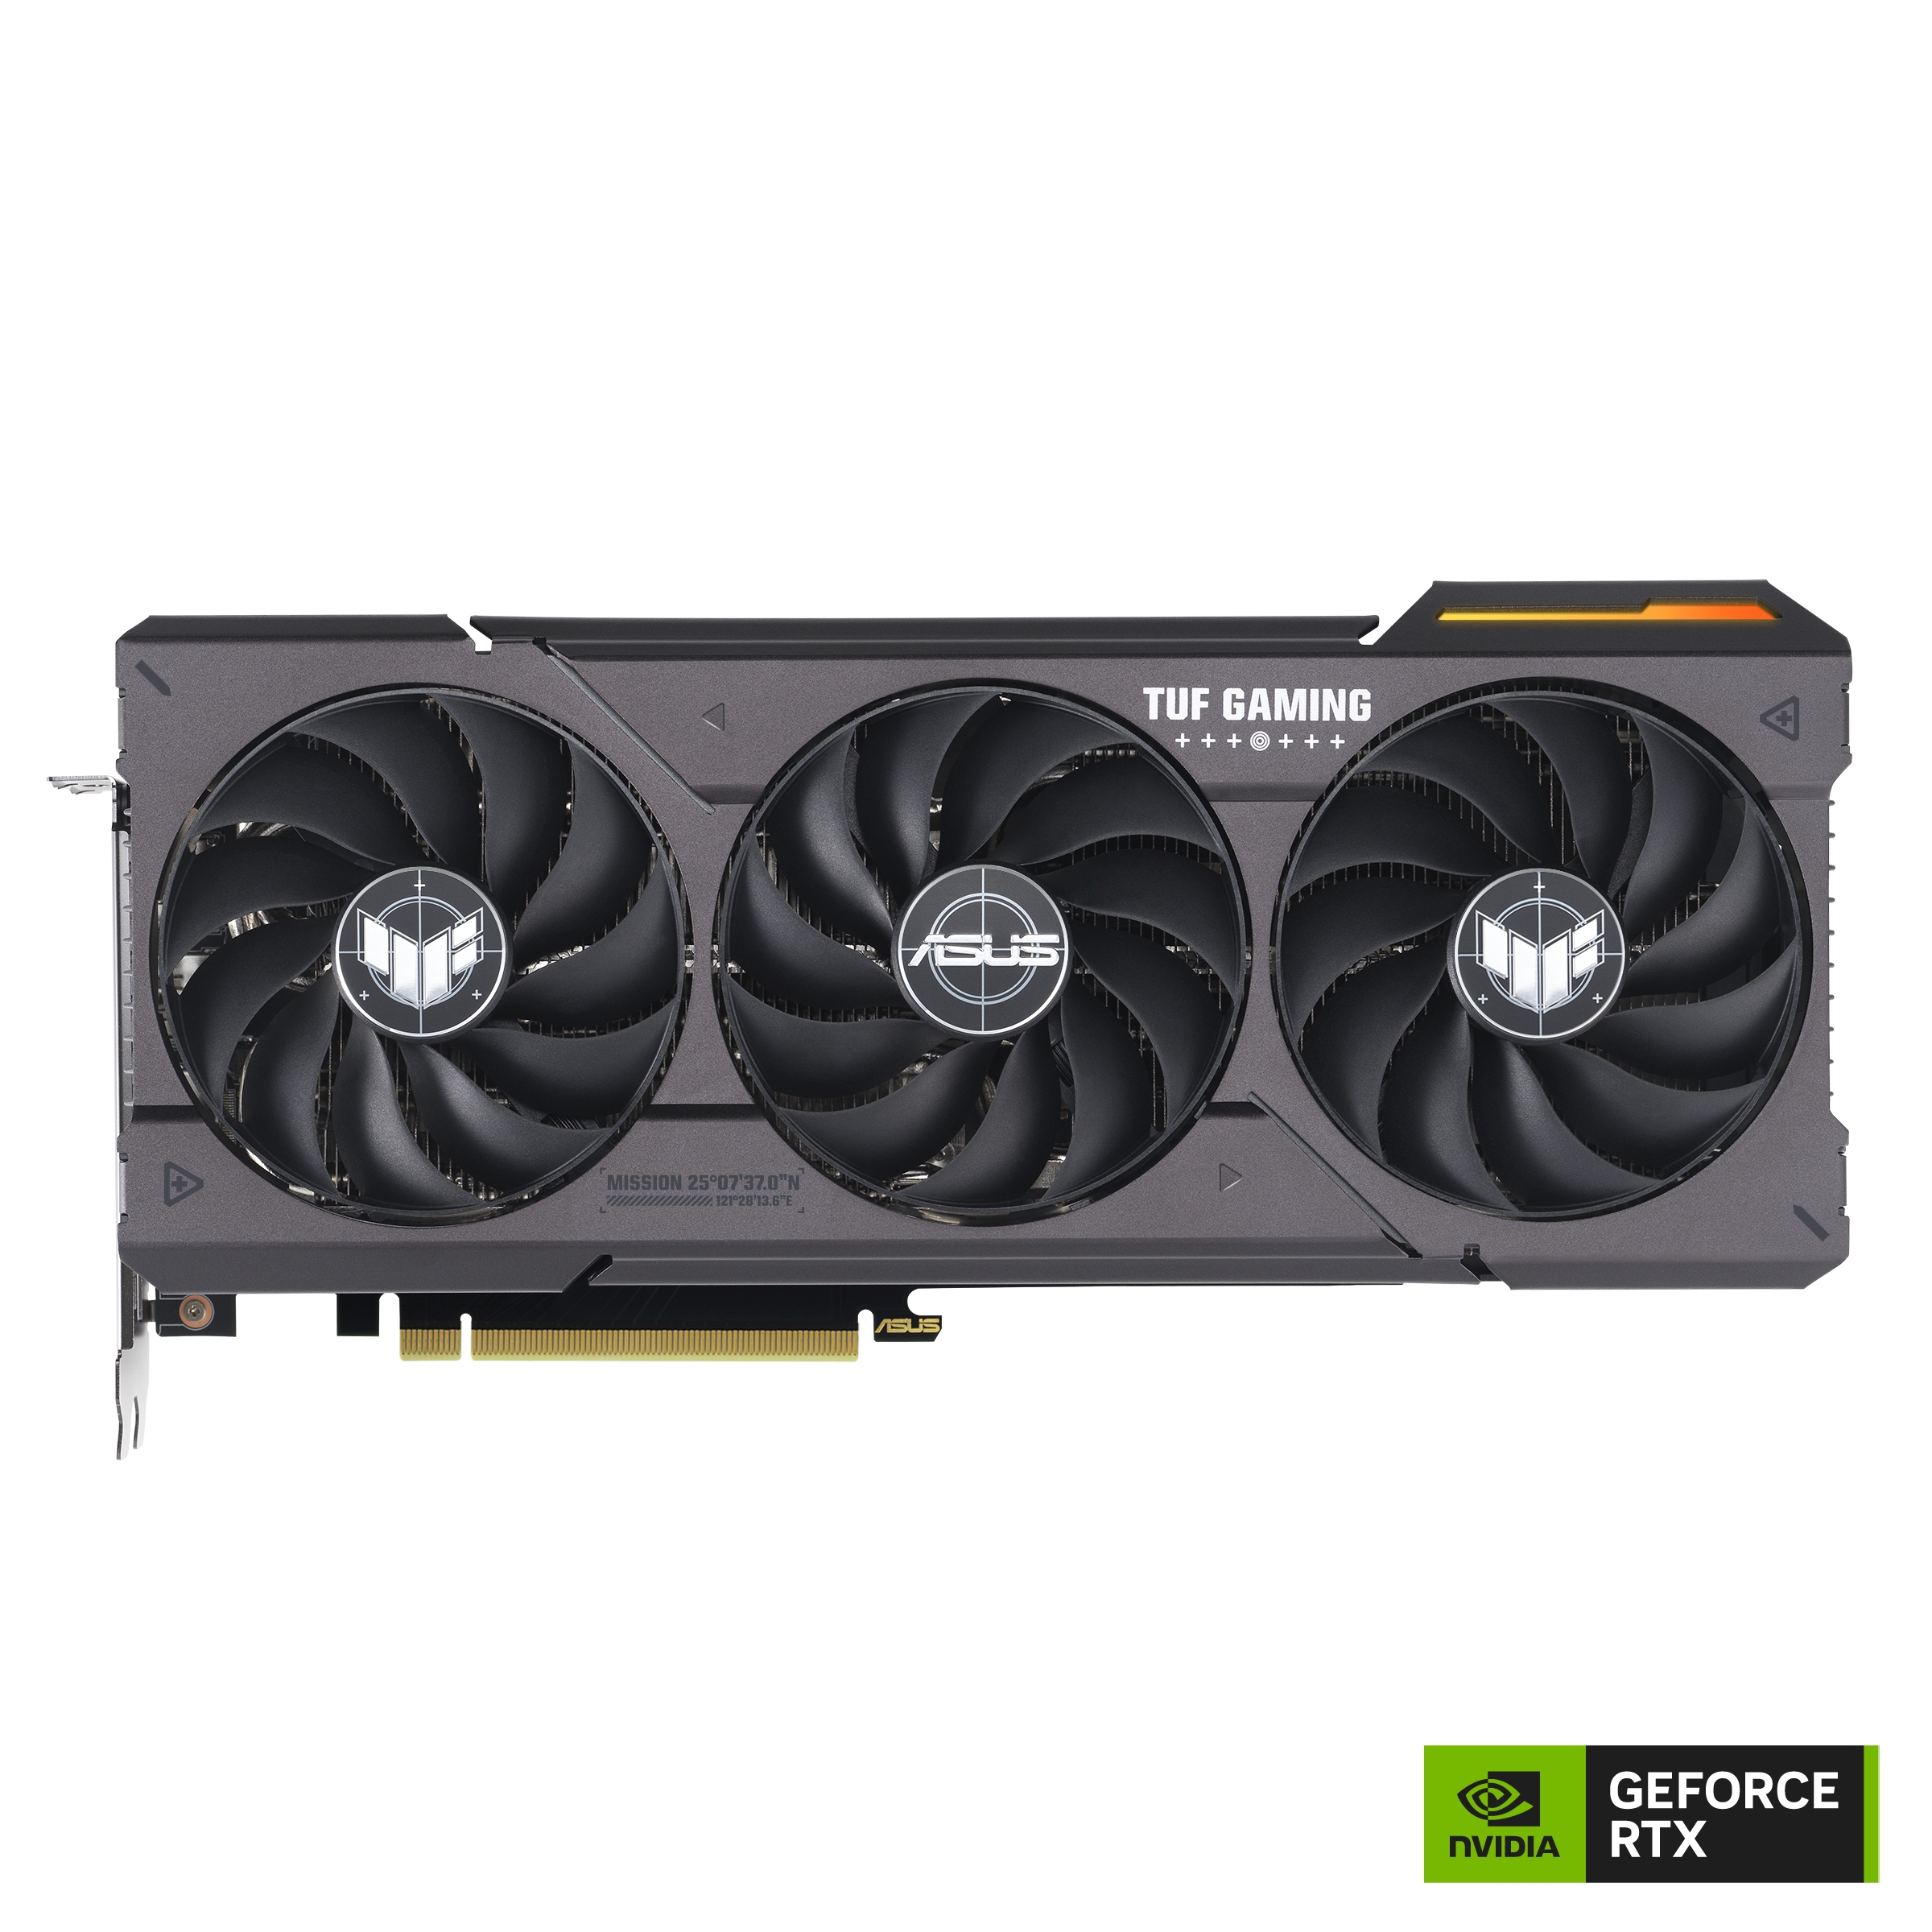 GeForce RTX 4060 TI 8GB VS. RTX 4070 - feat. GIGABYTE (Which is